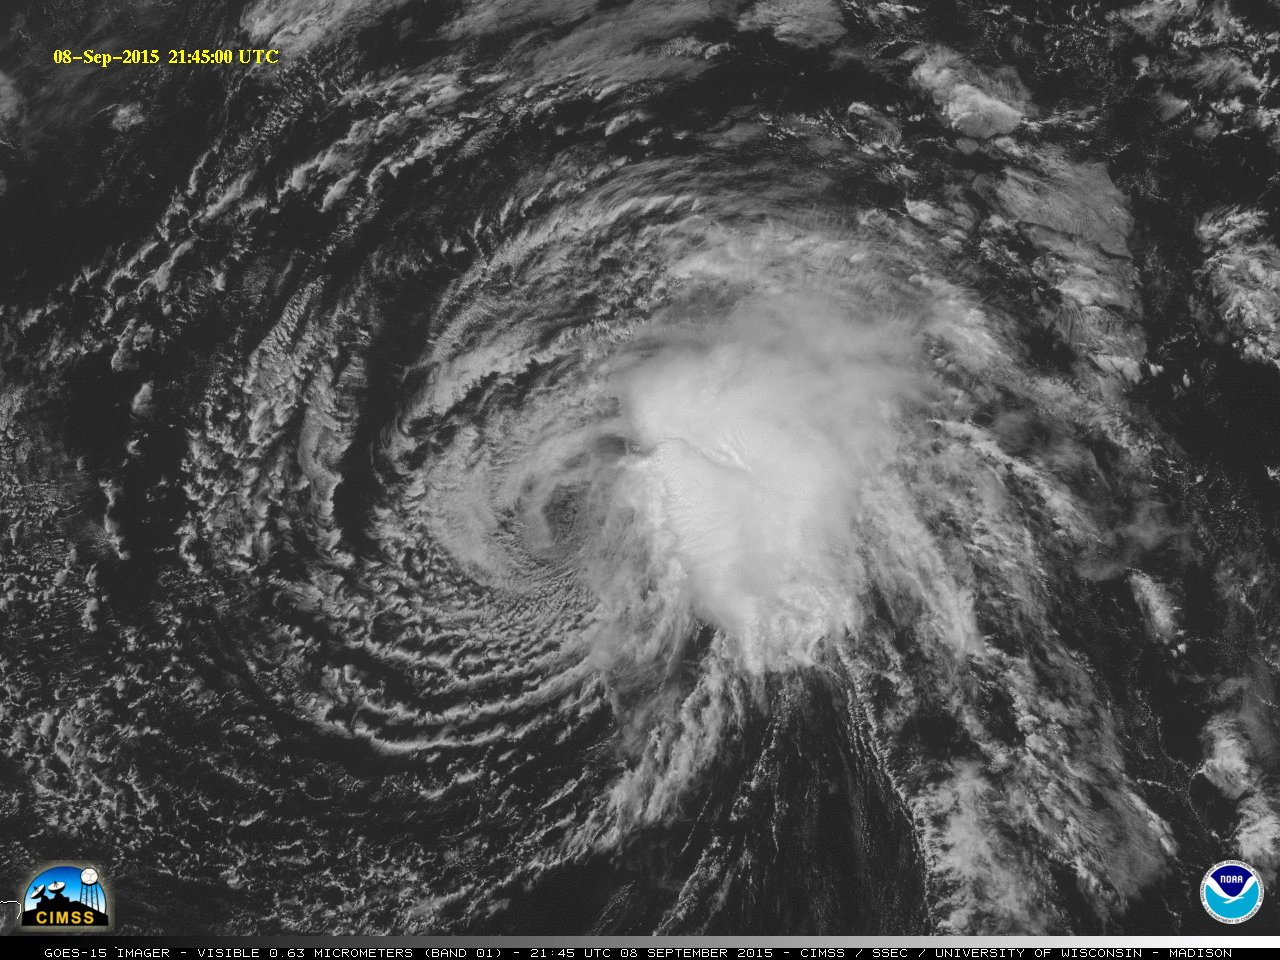 GOES-15 Visible (0.63 um) images [click to play animation]